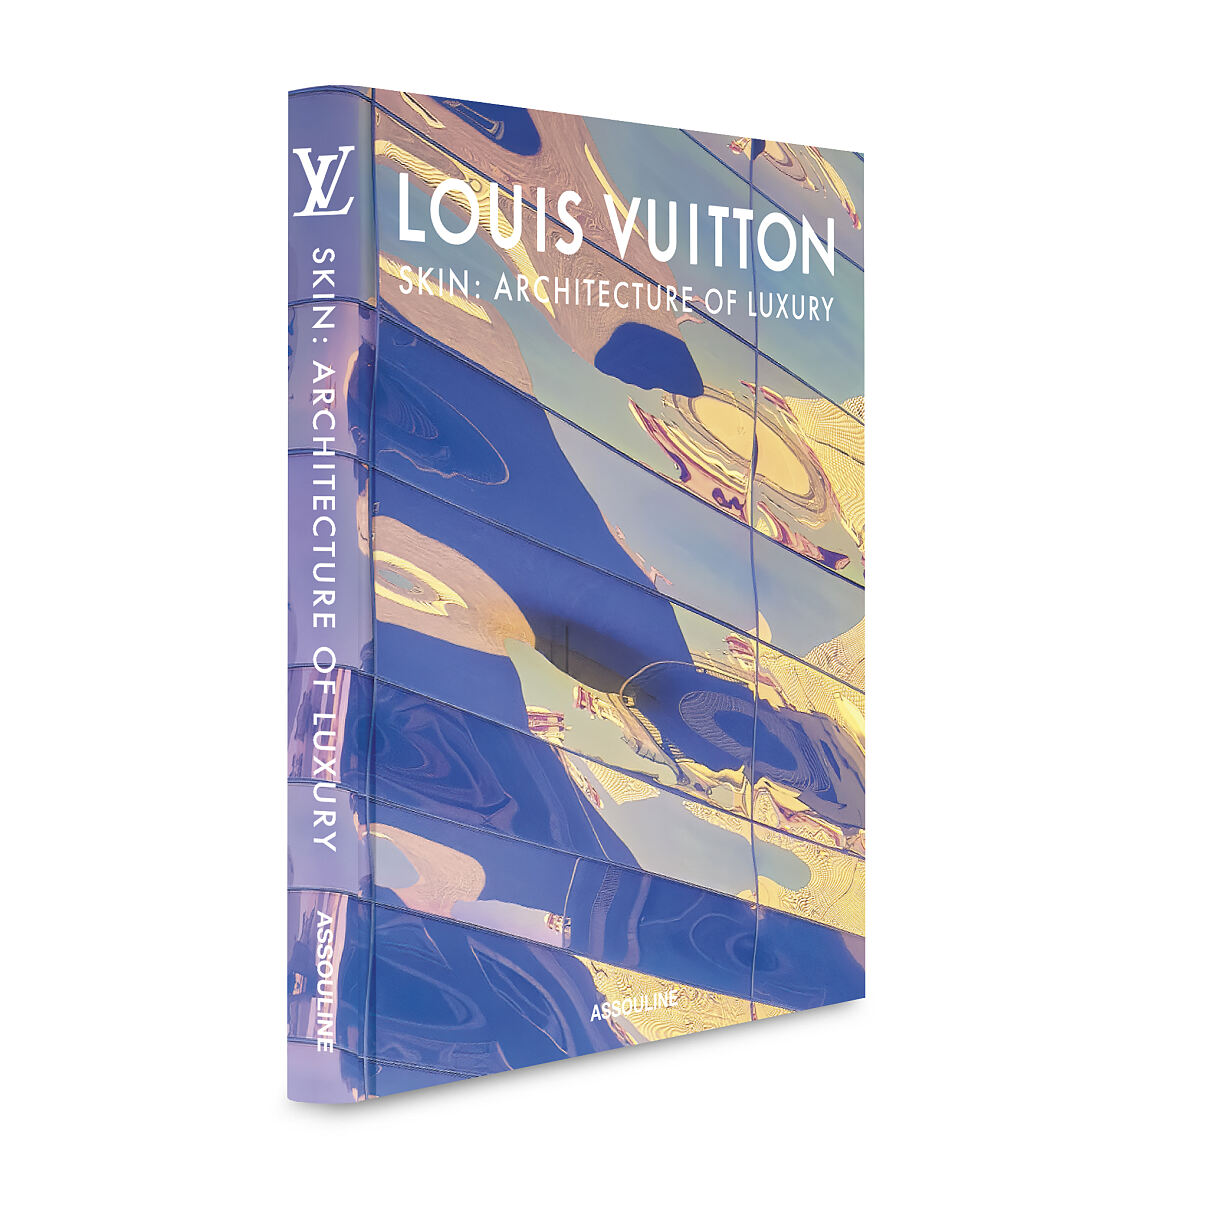 LV_Louis Vuitton Skin - The Architecture of Luxury_Cover (3)